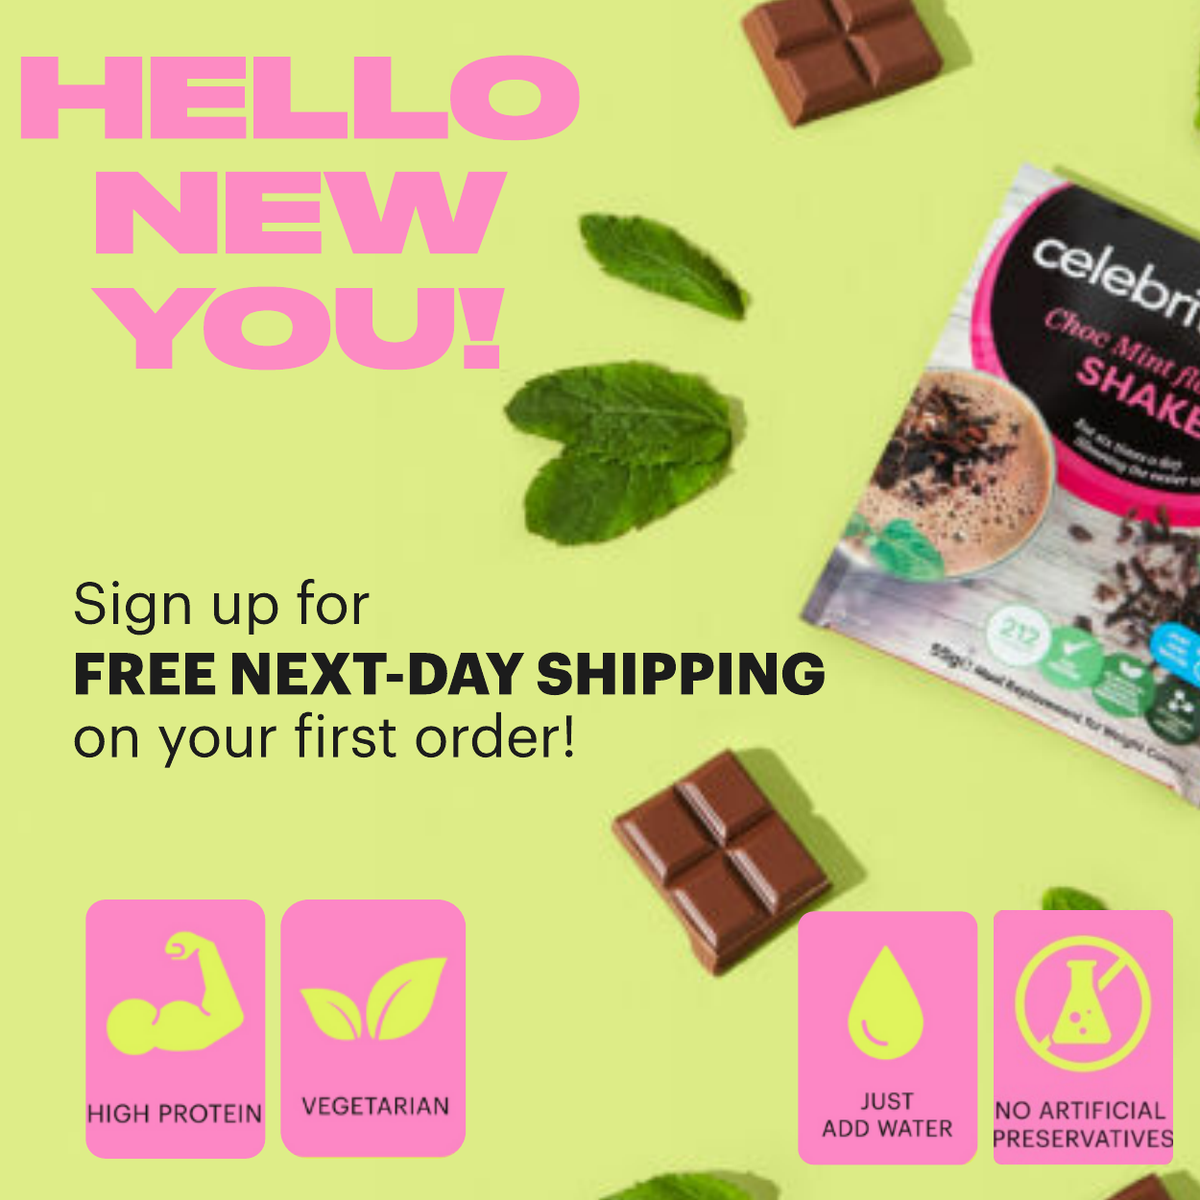 hello new you! sign up for free next day shipping on your first order...